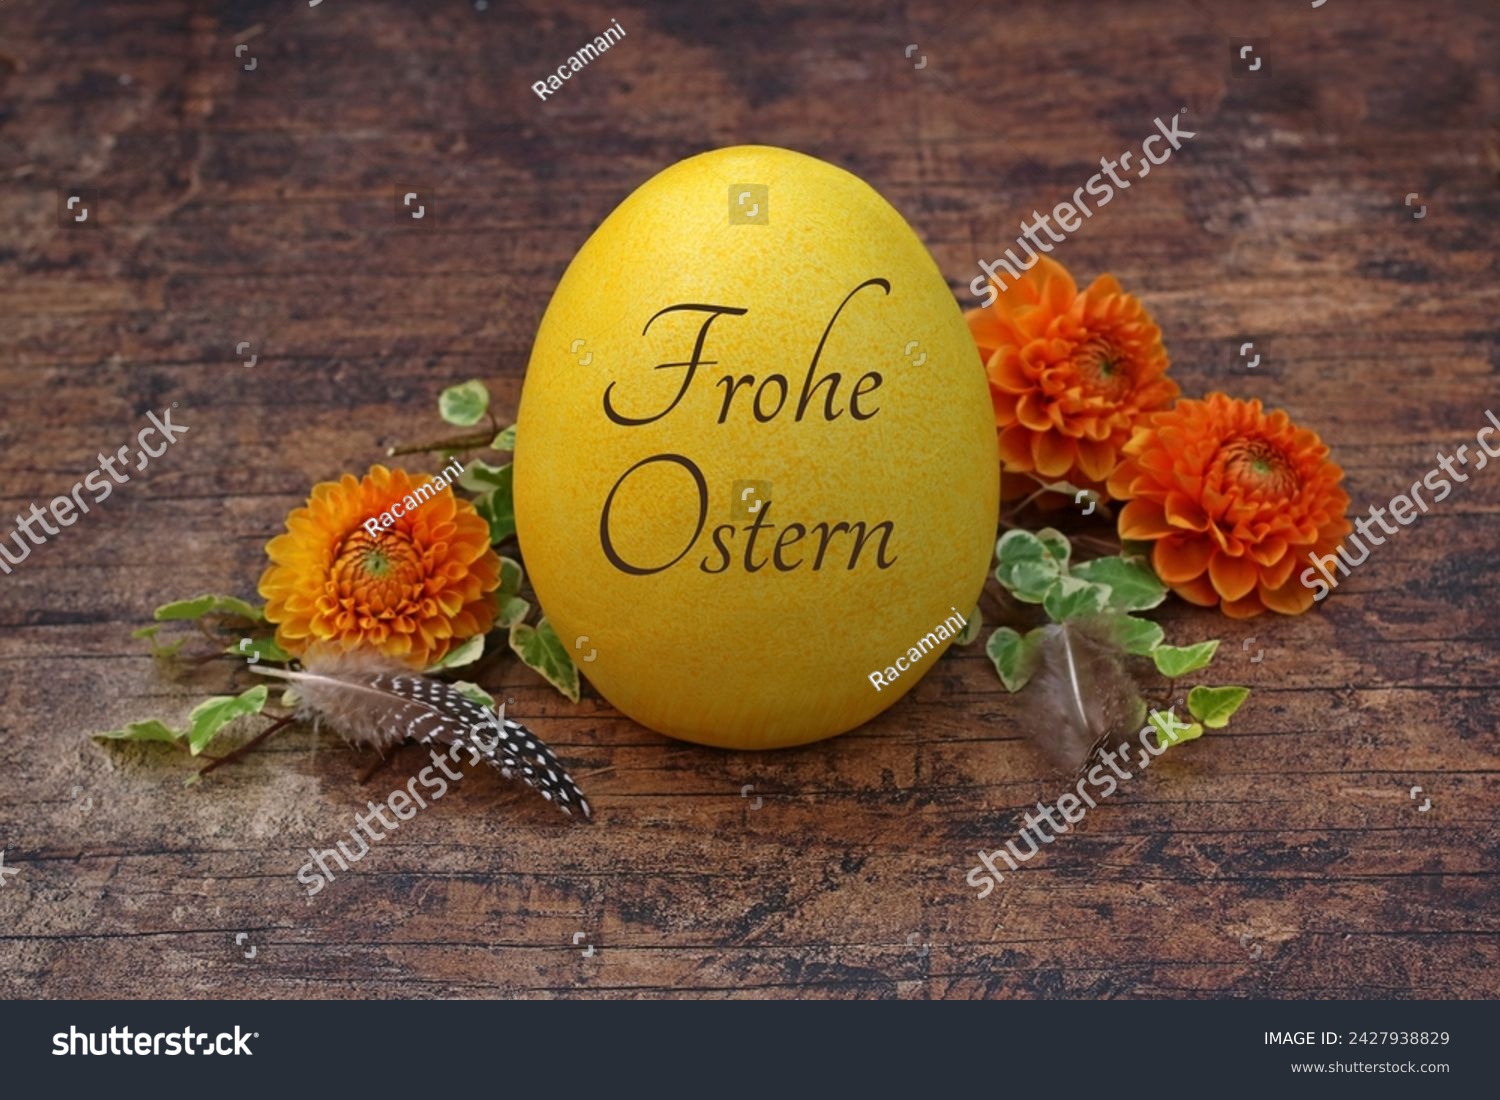 Happy Easter: Inscribed Easter egg on wooden background with flowers. German inscription reads Happy Easter. #2427938829